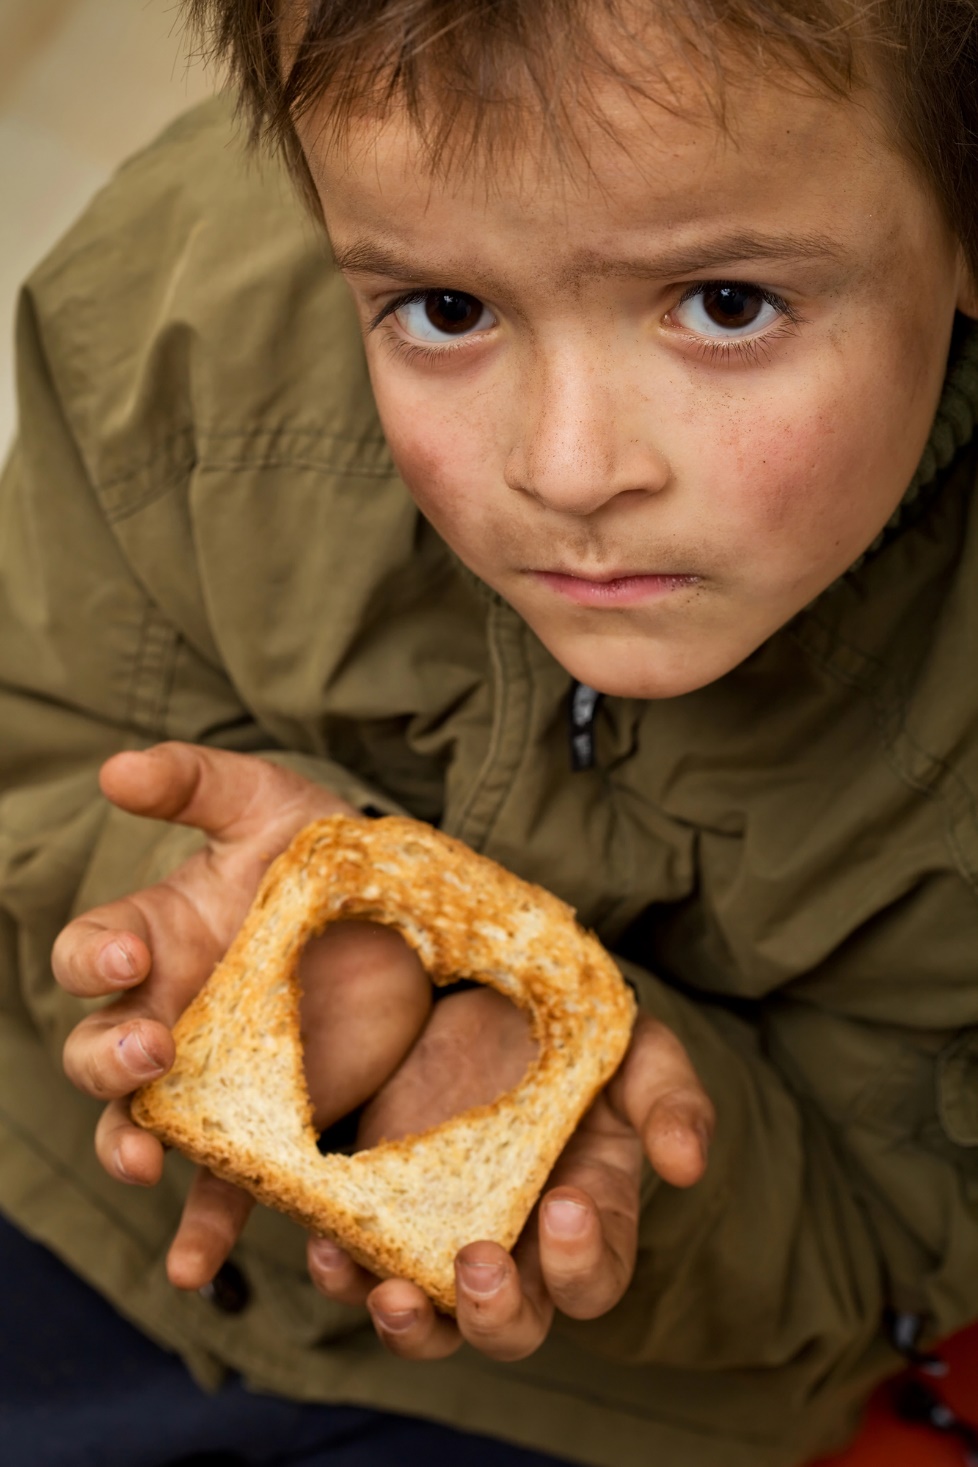 A child holding a piece of bread with a heart cut out

Description automatically generated